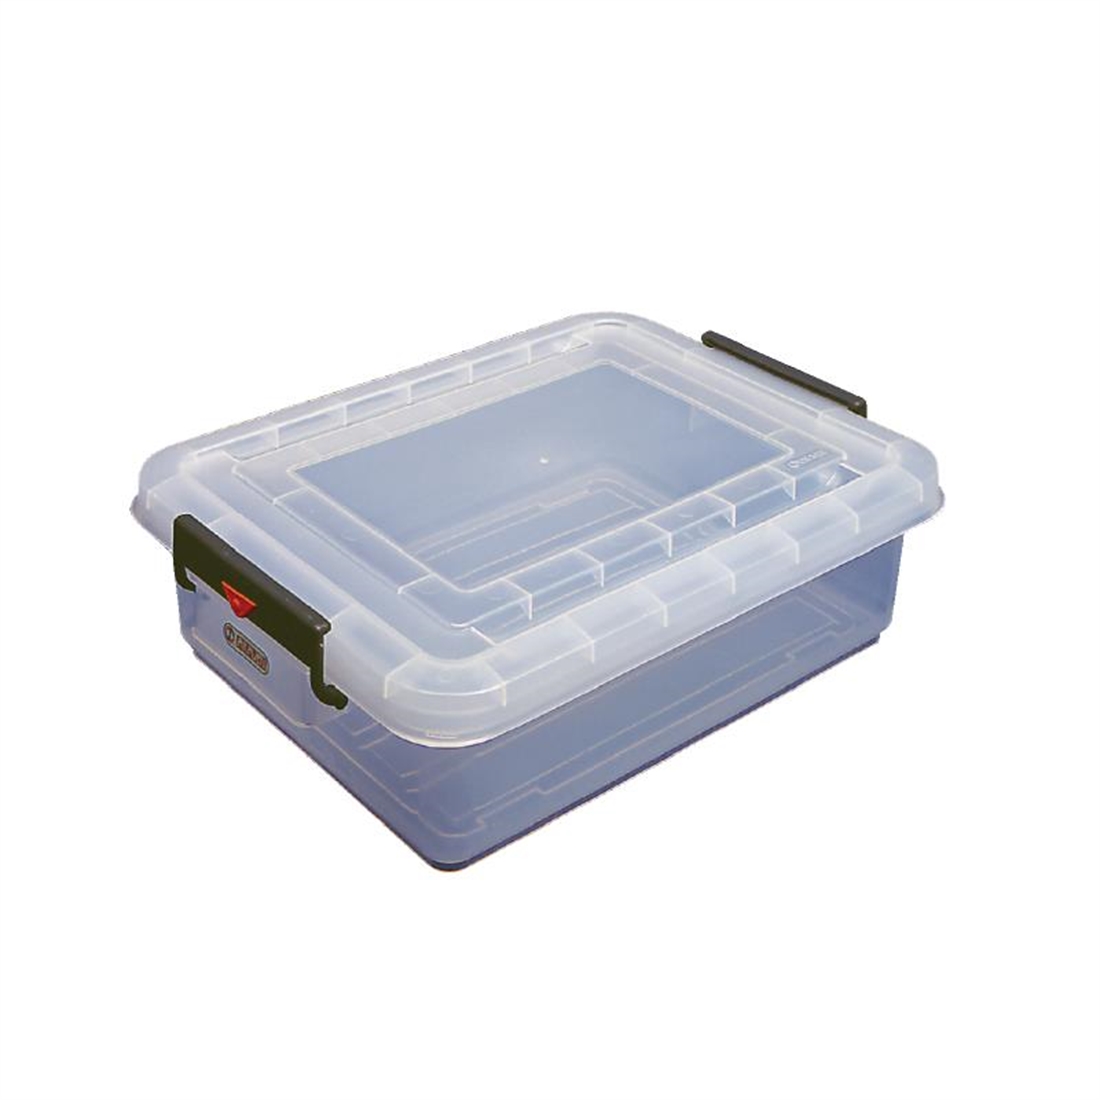 Araven Food Storage Box and Lid with Colour Clips